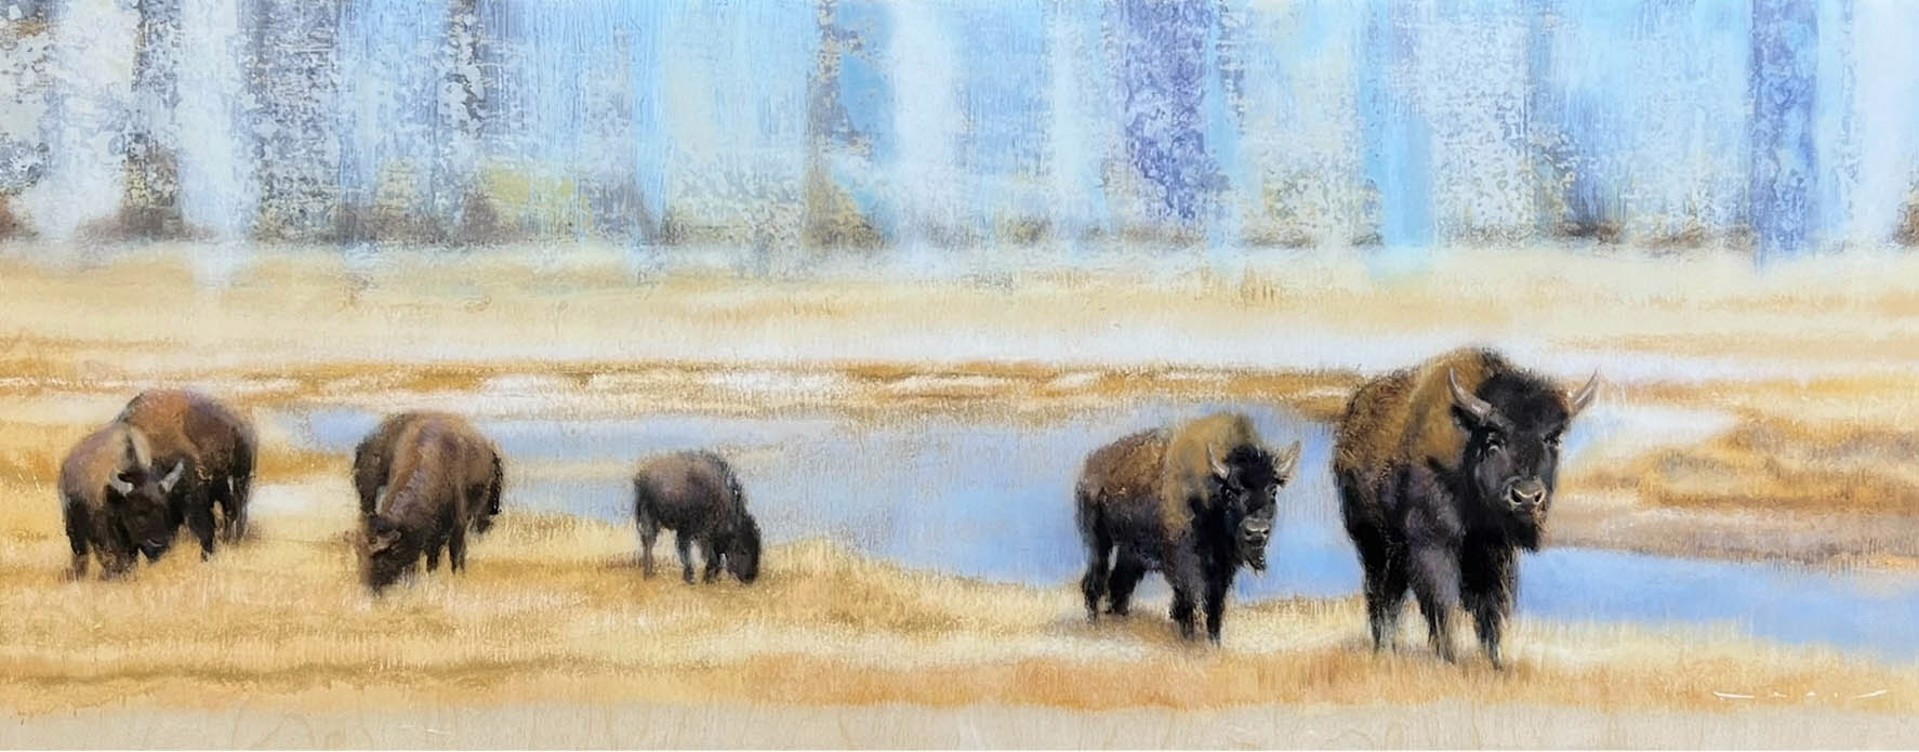 Original Painting Featuring A Bison Herd Walking Through Plains With Gold Leaf Details And Resin Finish